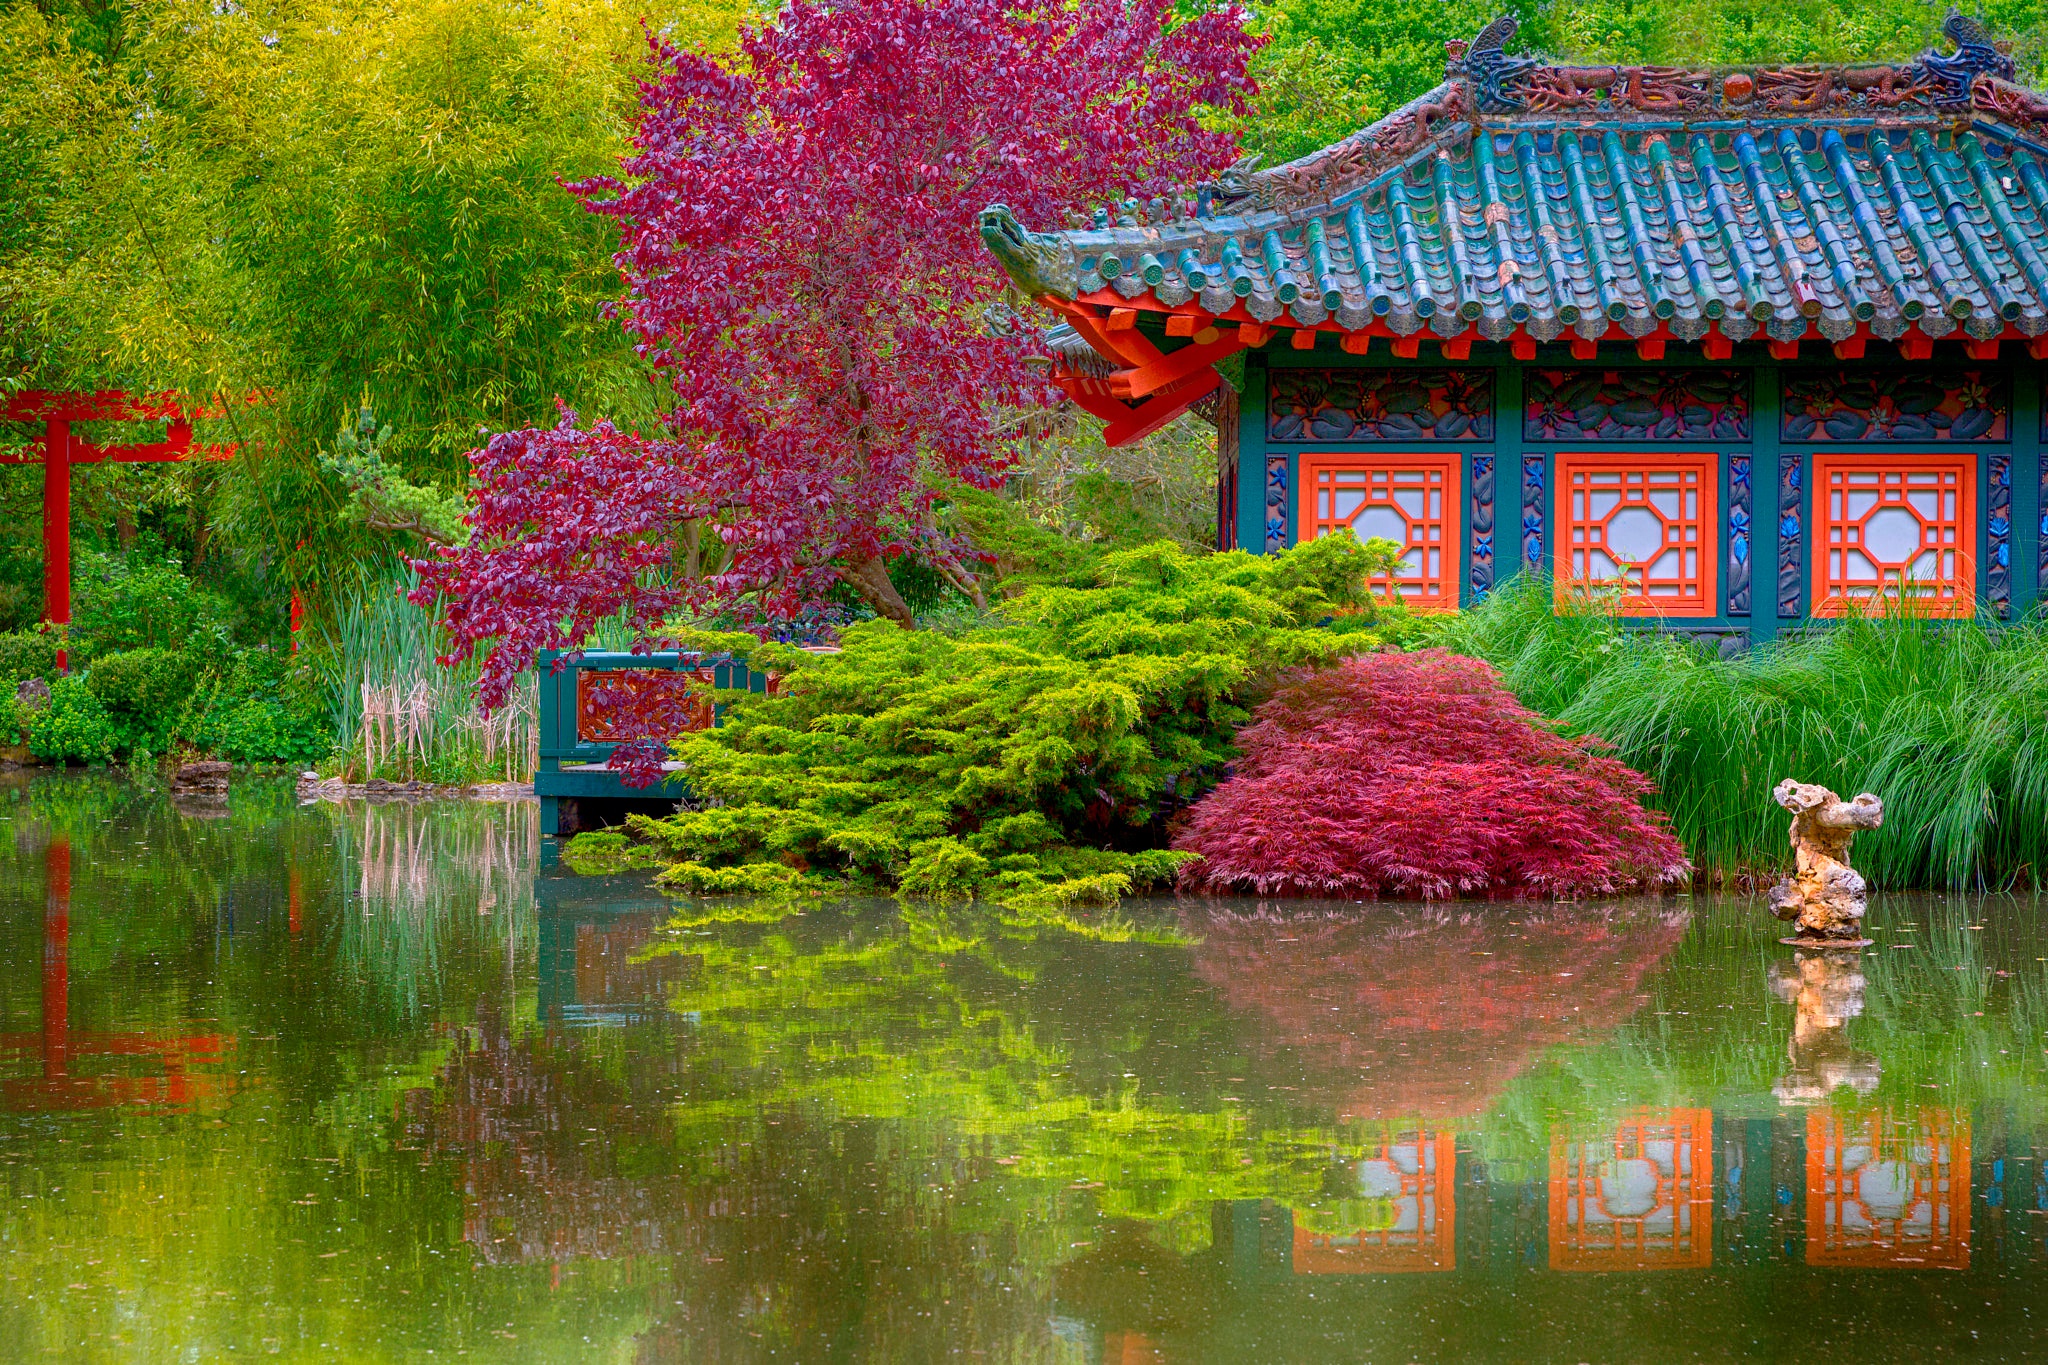 man made, japanese garden, colorful, lodge, pond, tree